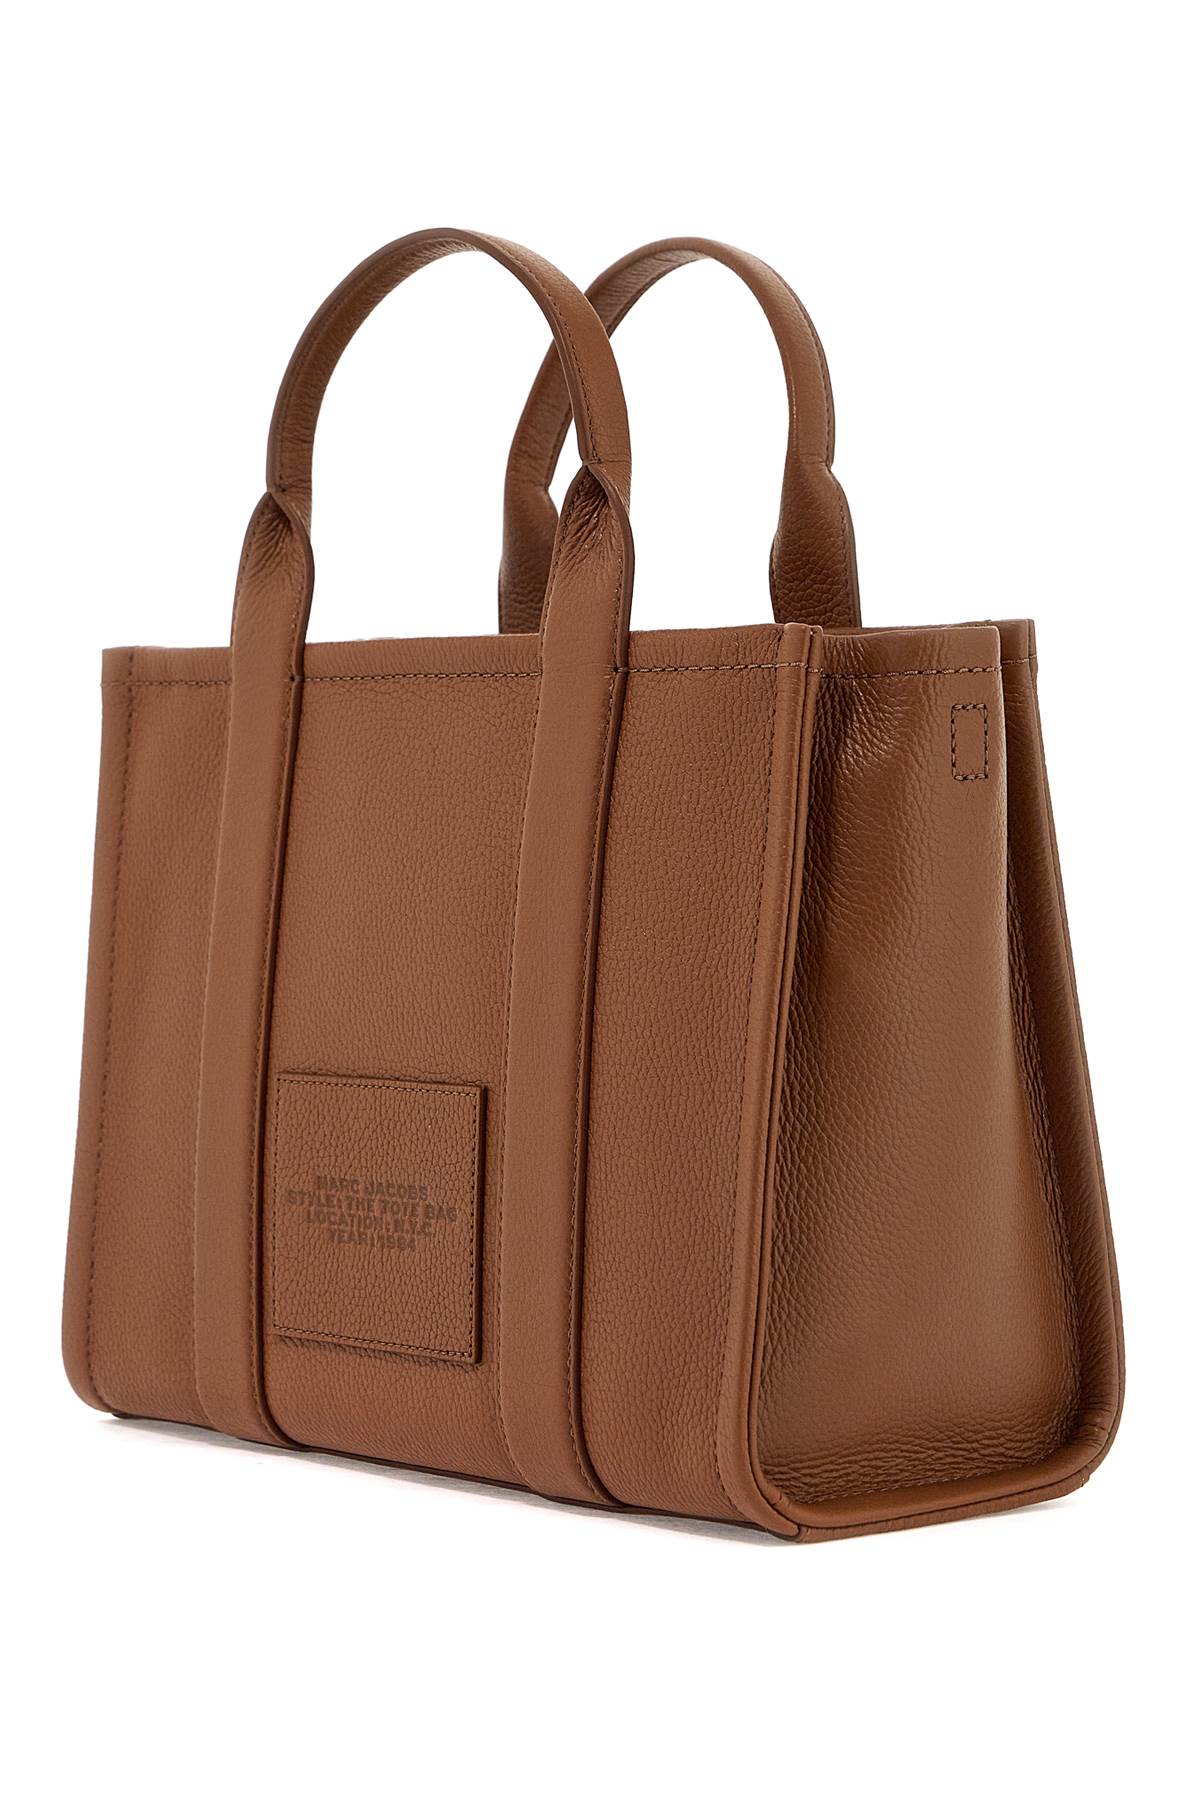 Shop Marc Jacobs The Leather Medium Tote Bag In Argan Oil (brown)